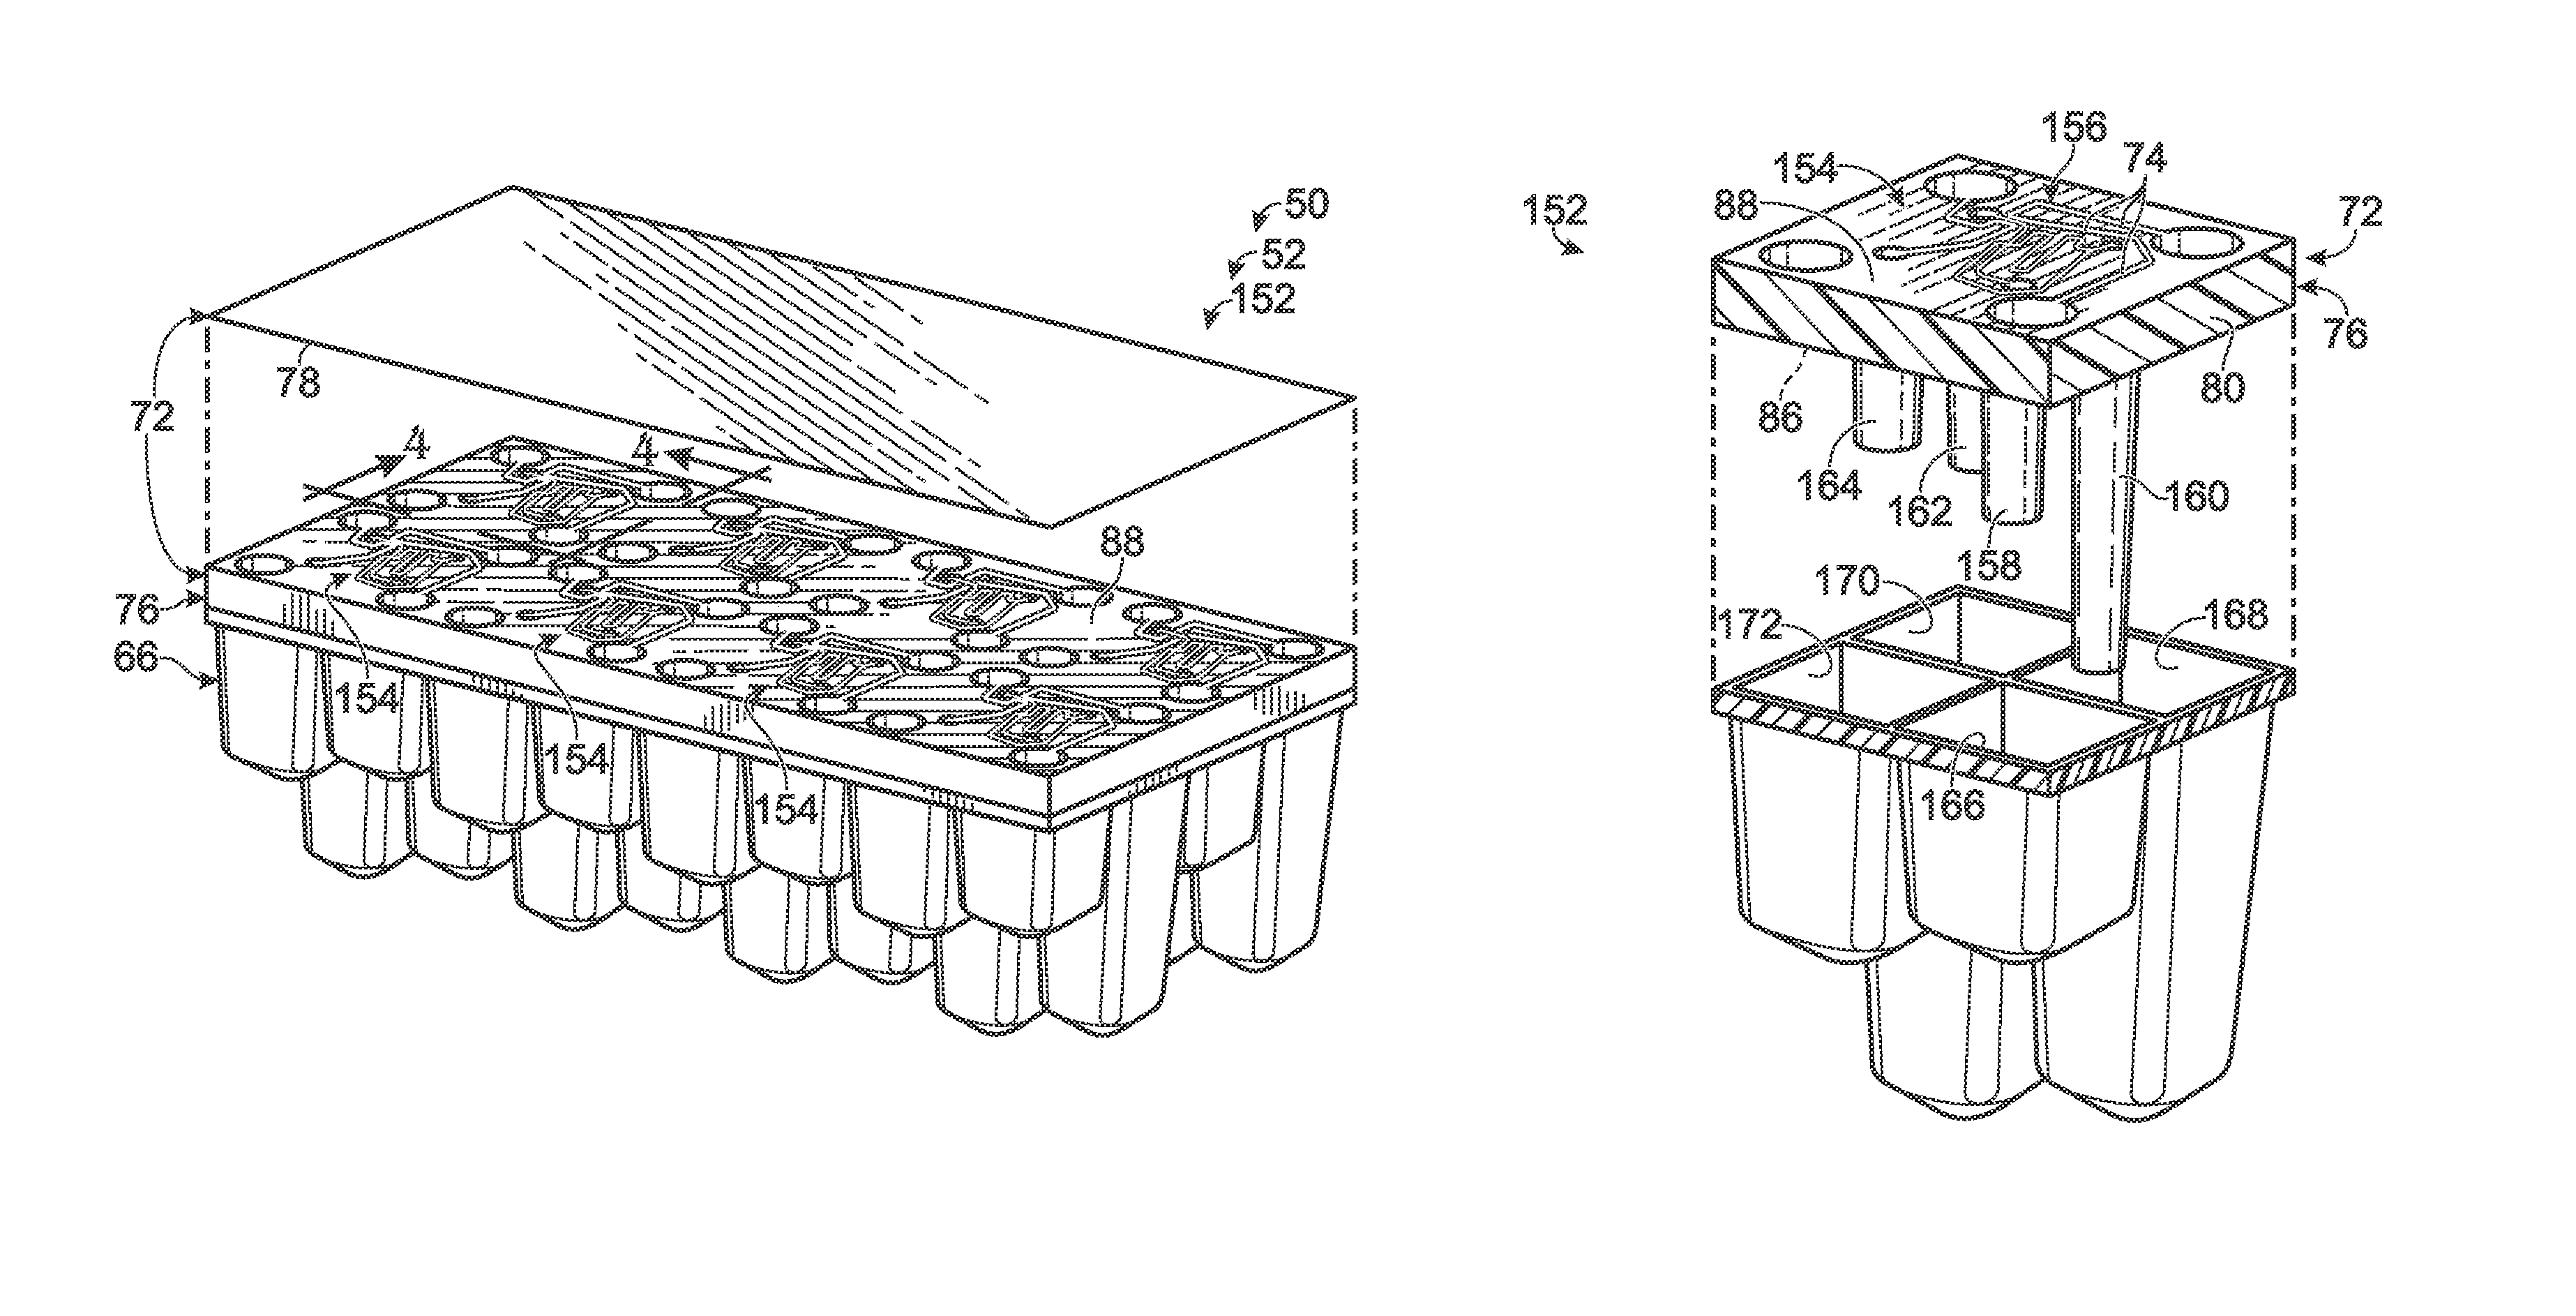 Microfluidic system with fluid pickups